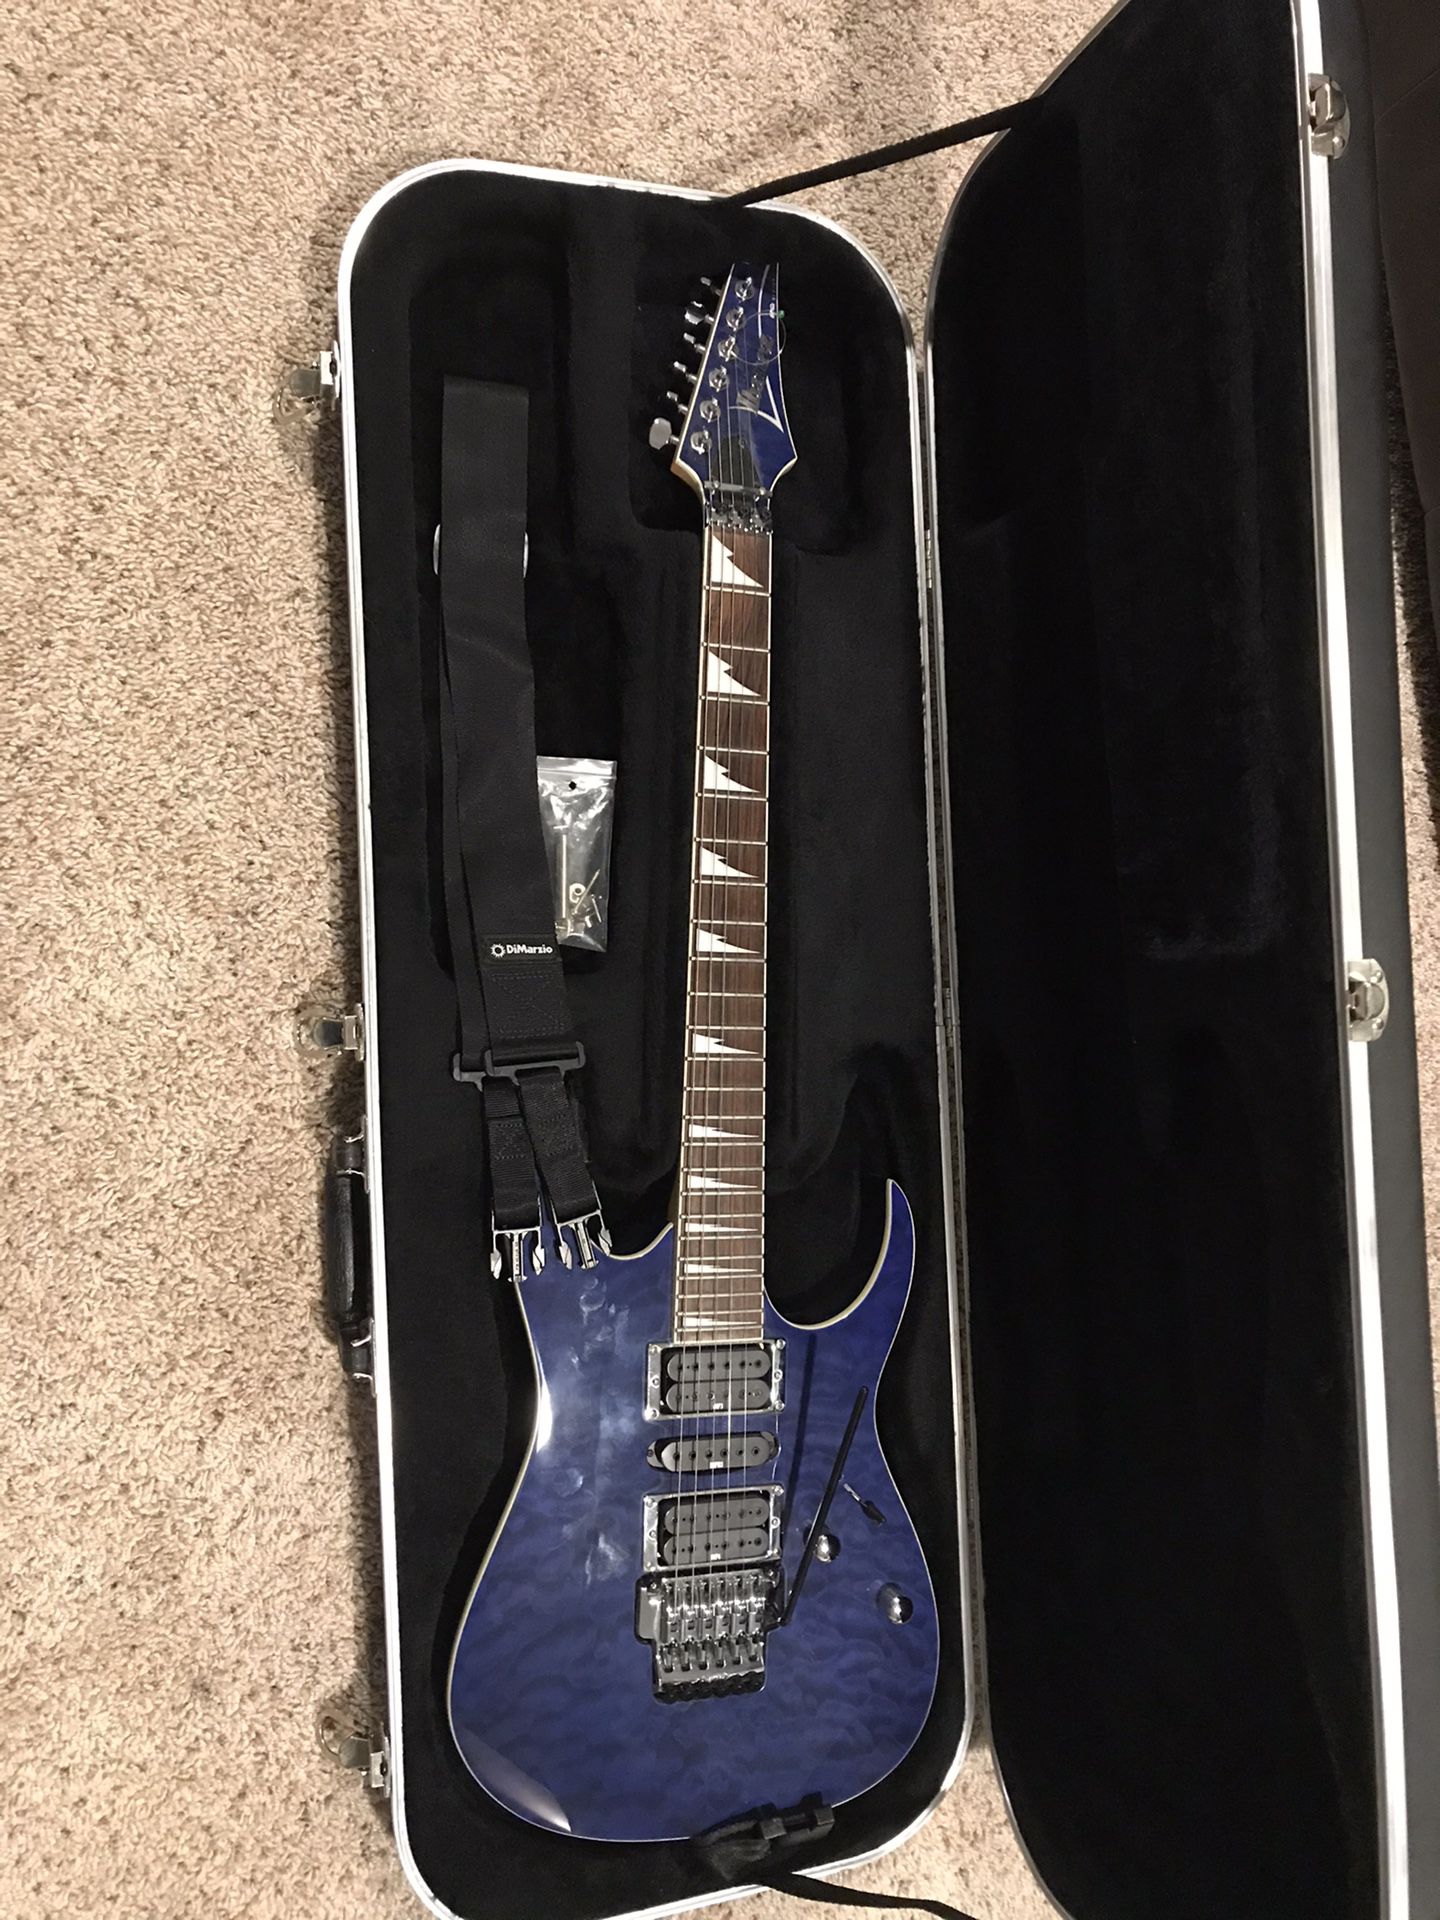 Ibanez RG4EX1 electric guitar with DiMarzio guitar strap and Road Runner hard shell case